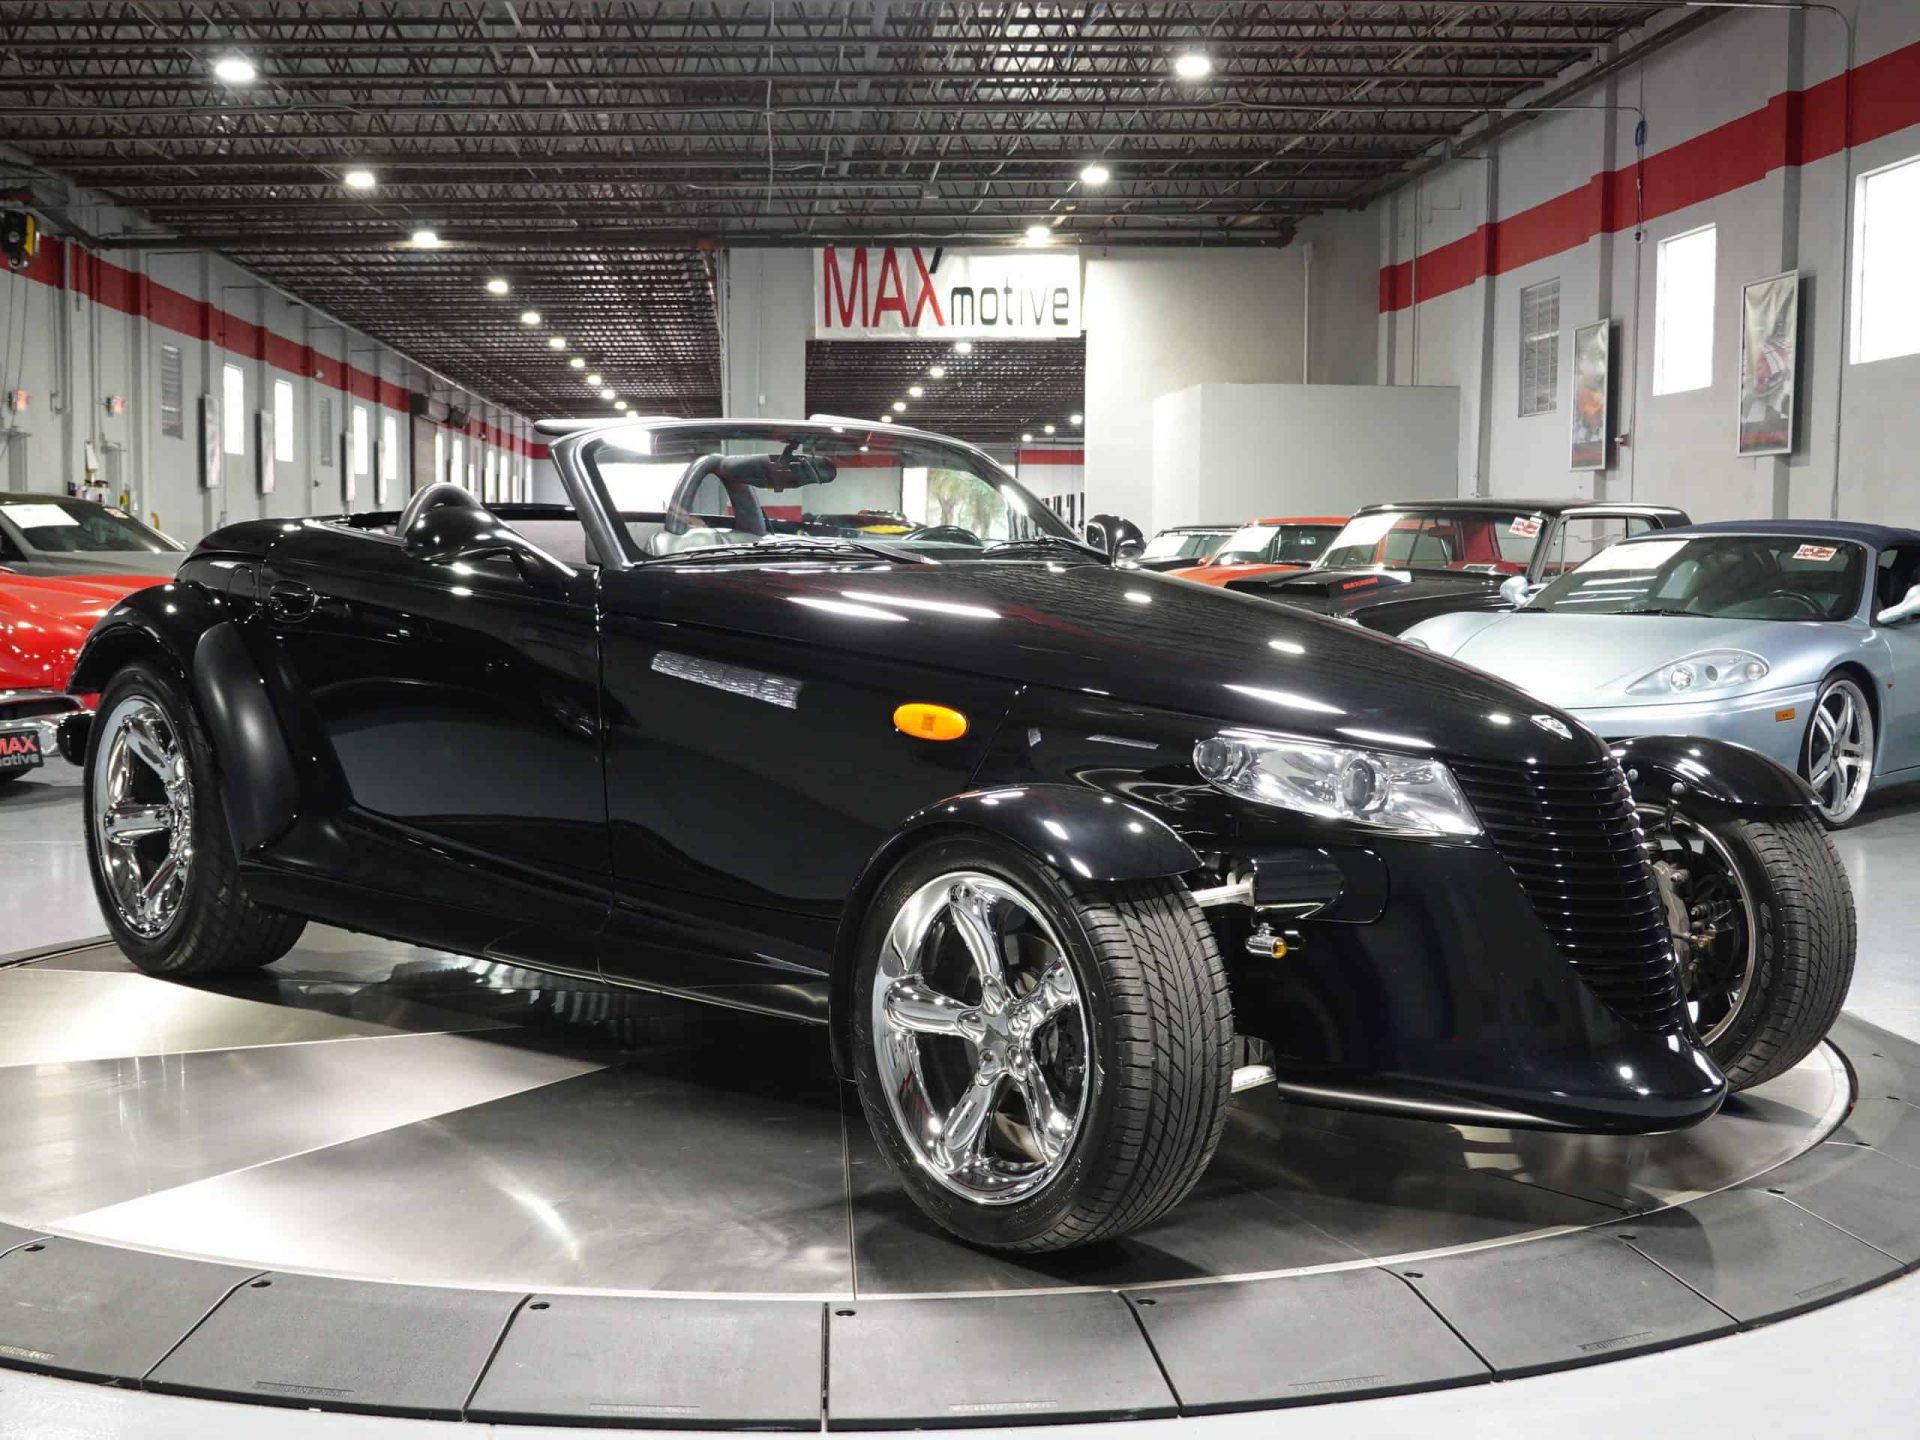 Plymouth Prowler Wallpapers